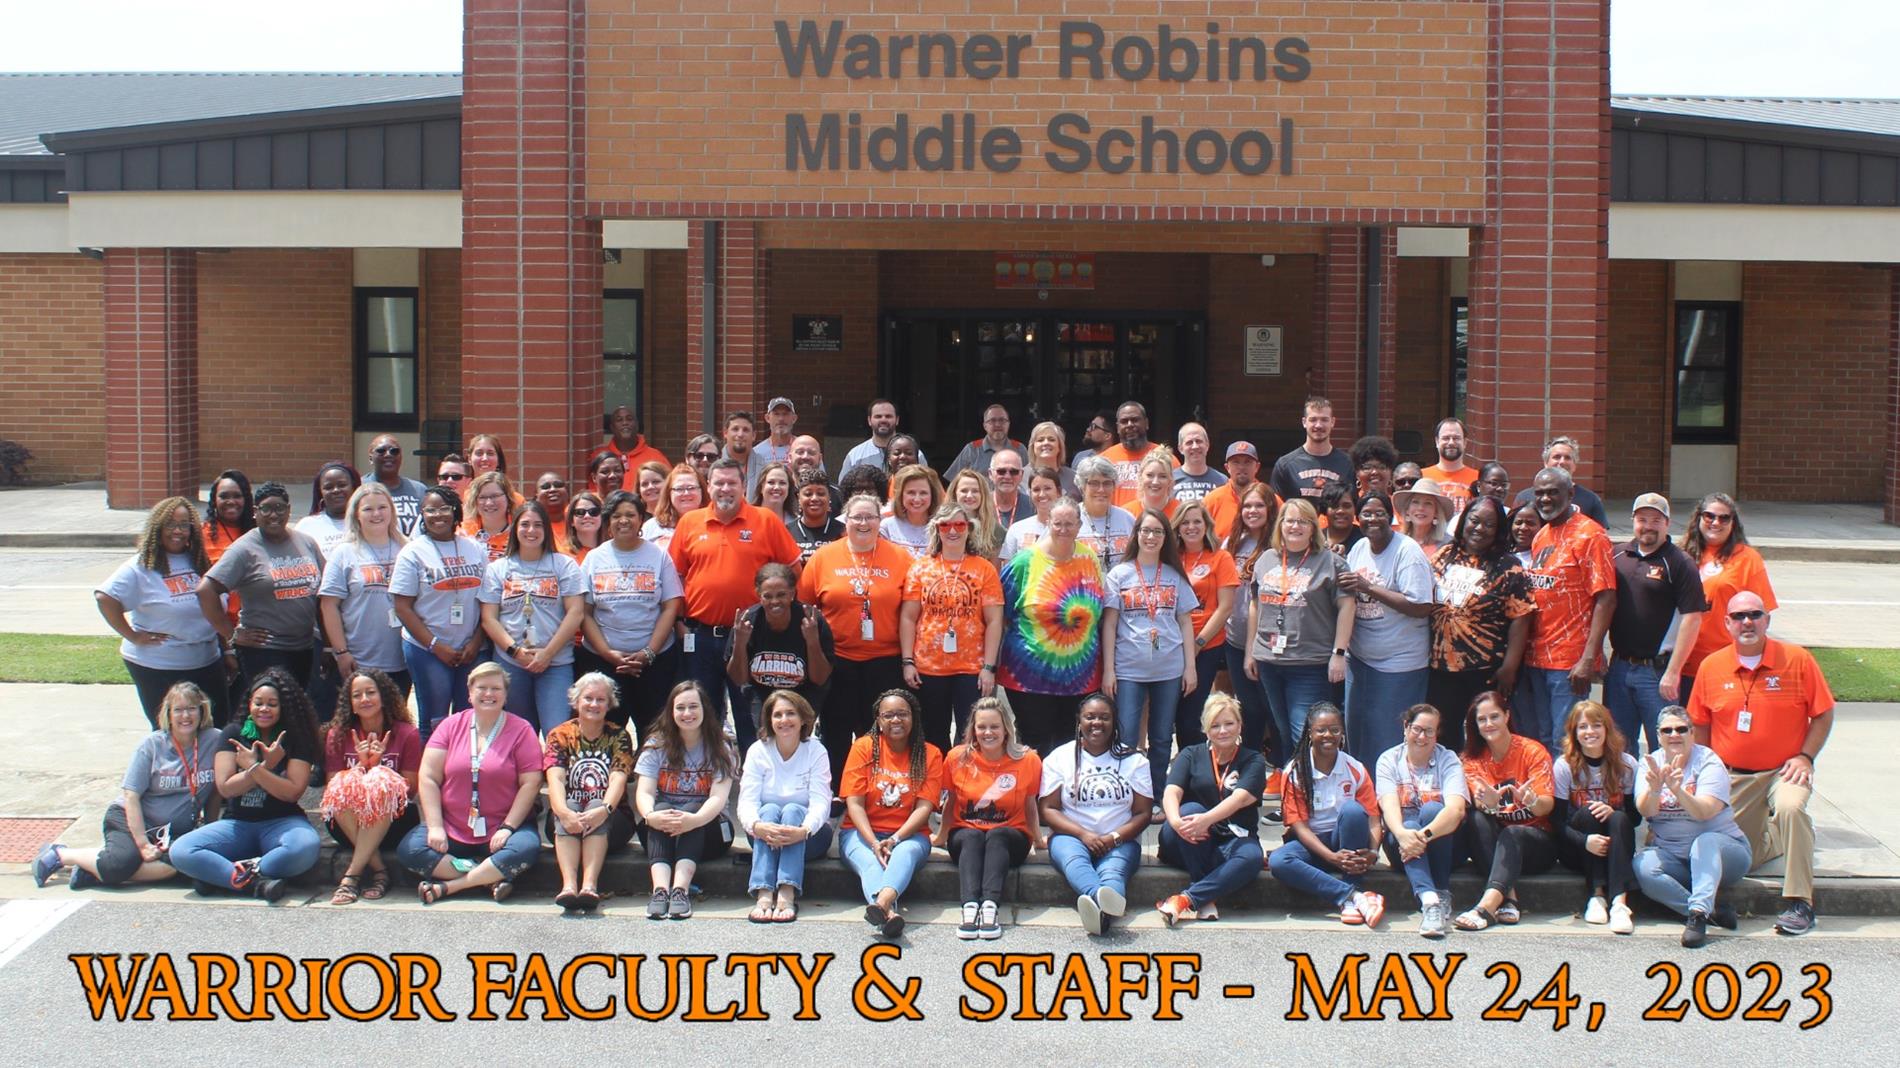 Warner Robins Middle - Faculty & Staff 2023